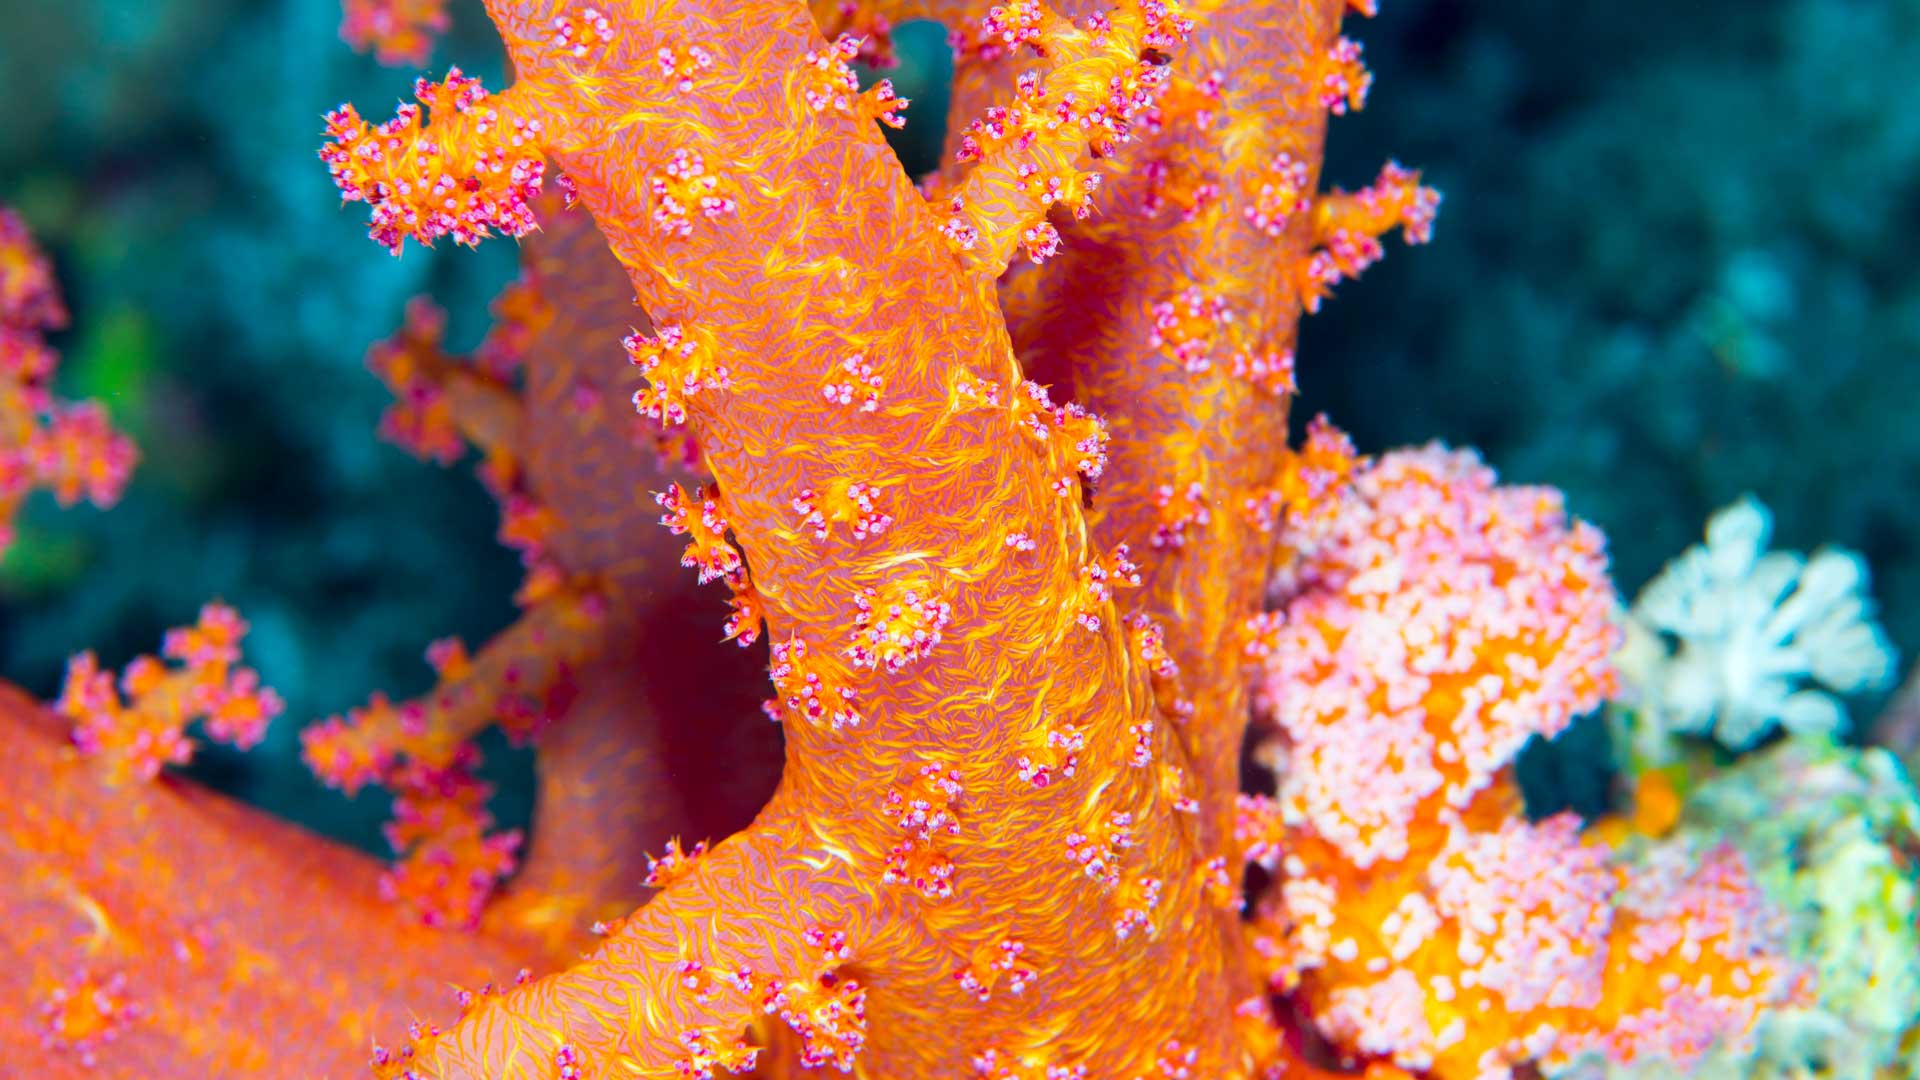 Tree coral